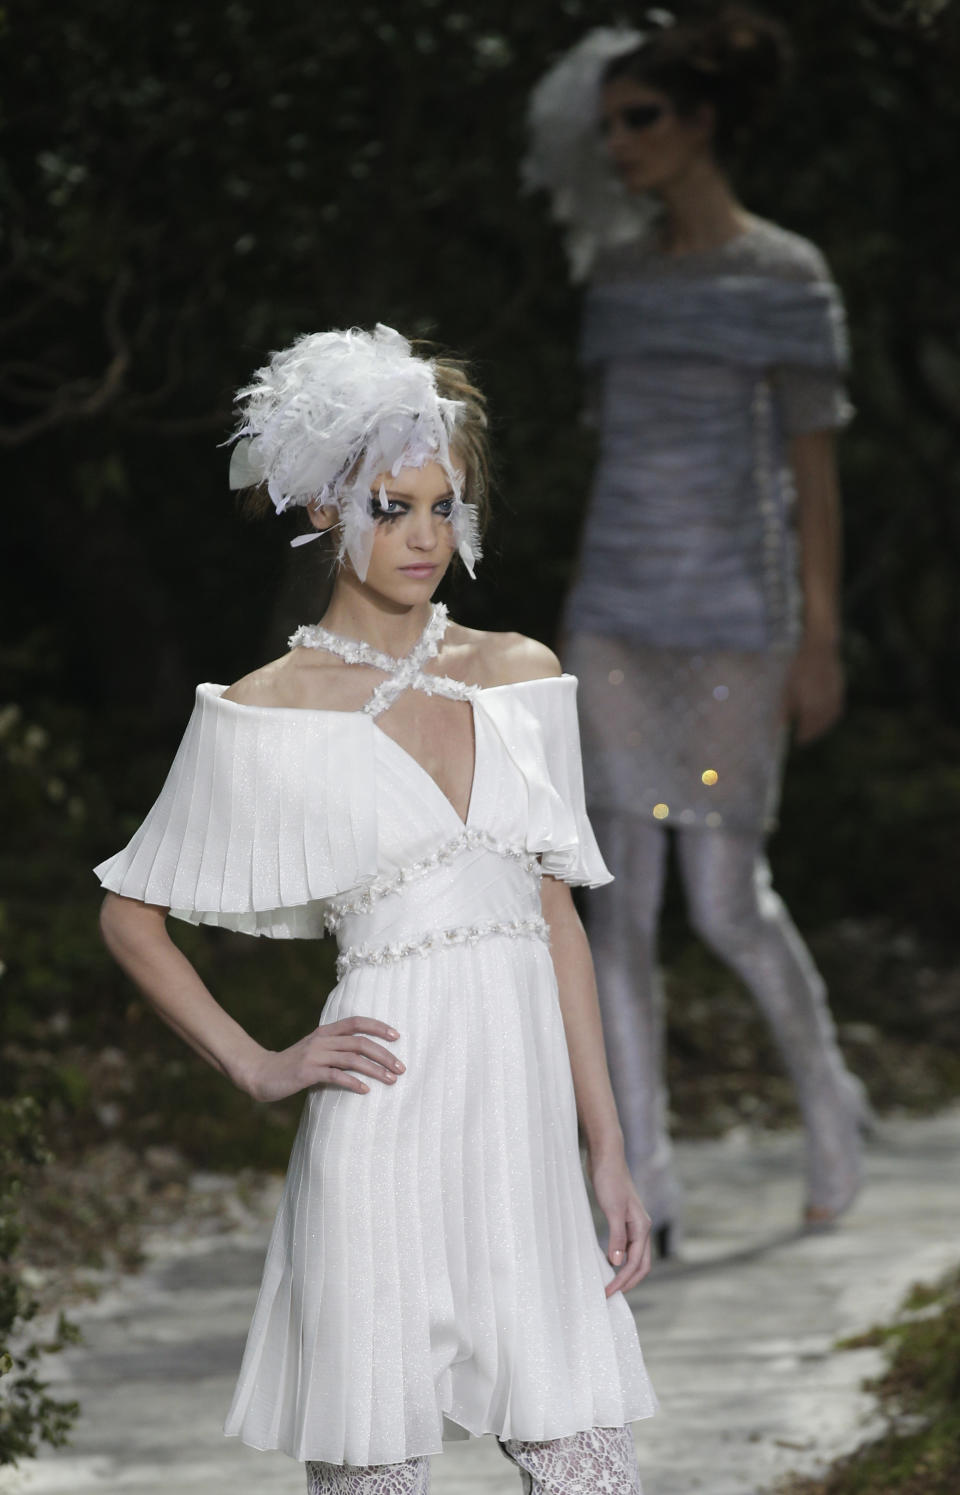 A model presents a creation by German fashion designer Karl Lagerfeld for Chanel's Spring-Summer 2013 Haute Couture fashion collection, presented in Paris, Tuesday, Jan.22, 2013. (AP Photo/Christophe Ena)